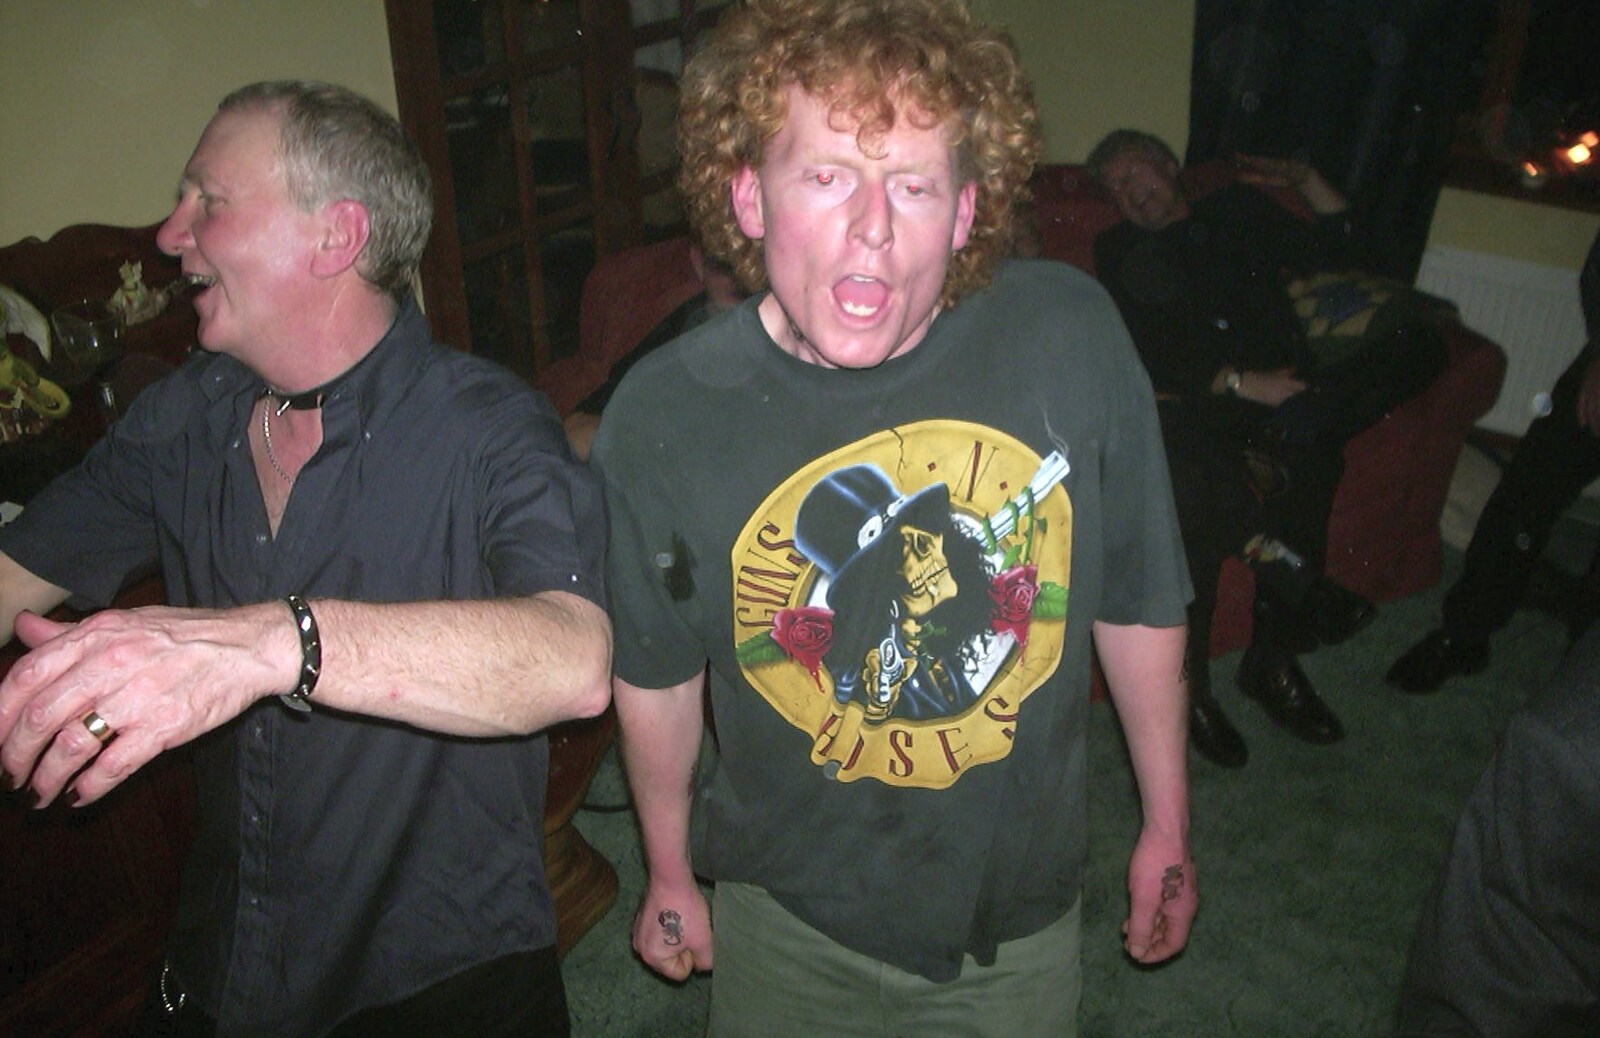 John Willy and Wavy are dancing from Anne's Gothic Night, Thorndon - 25th January 2003